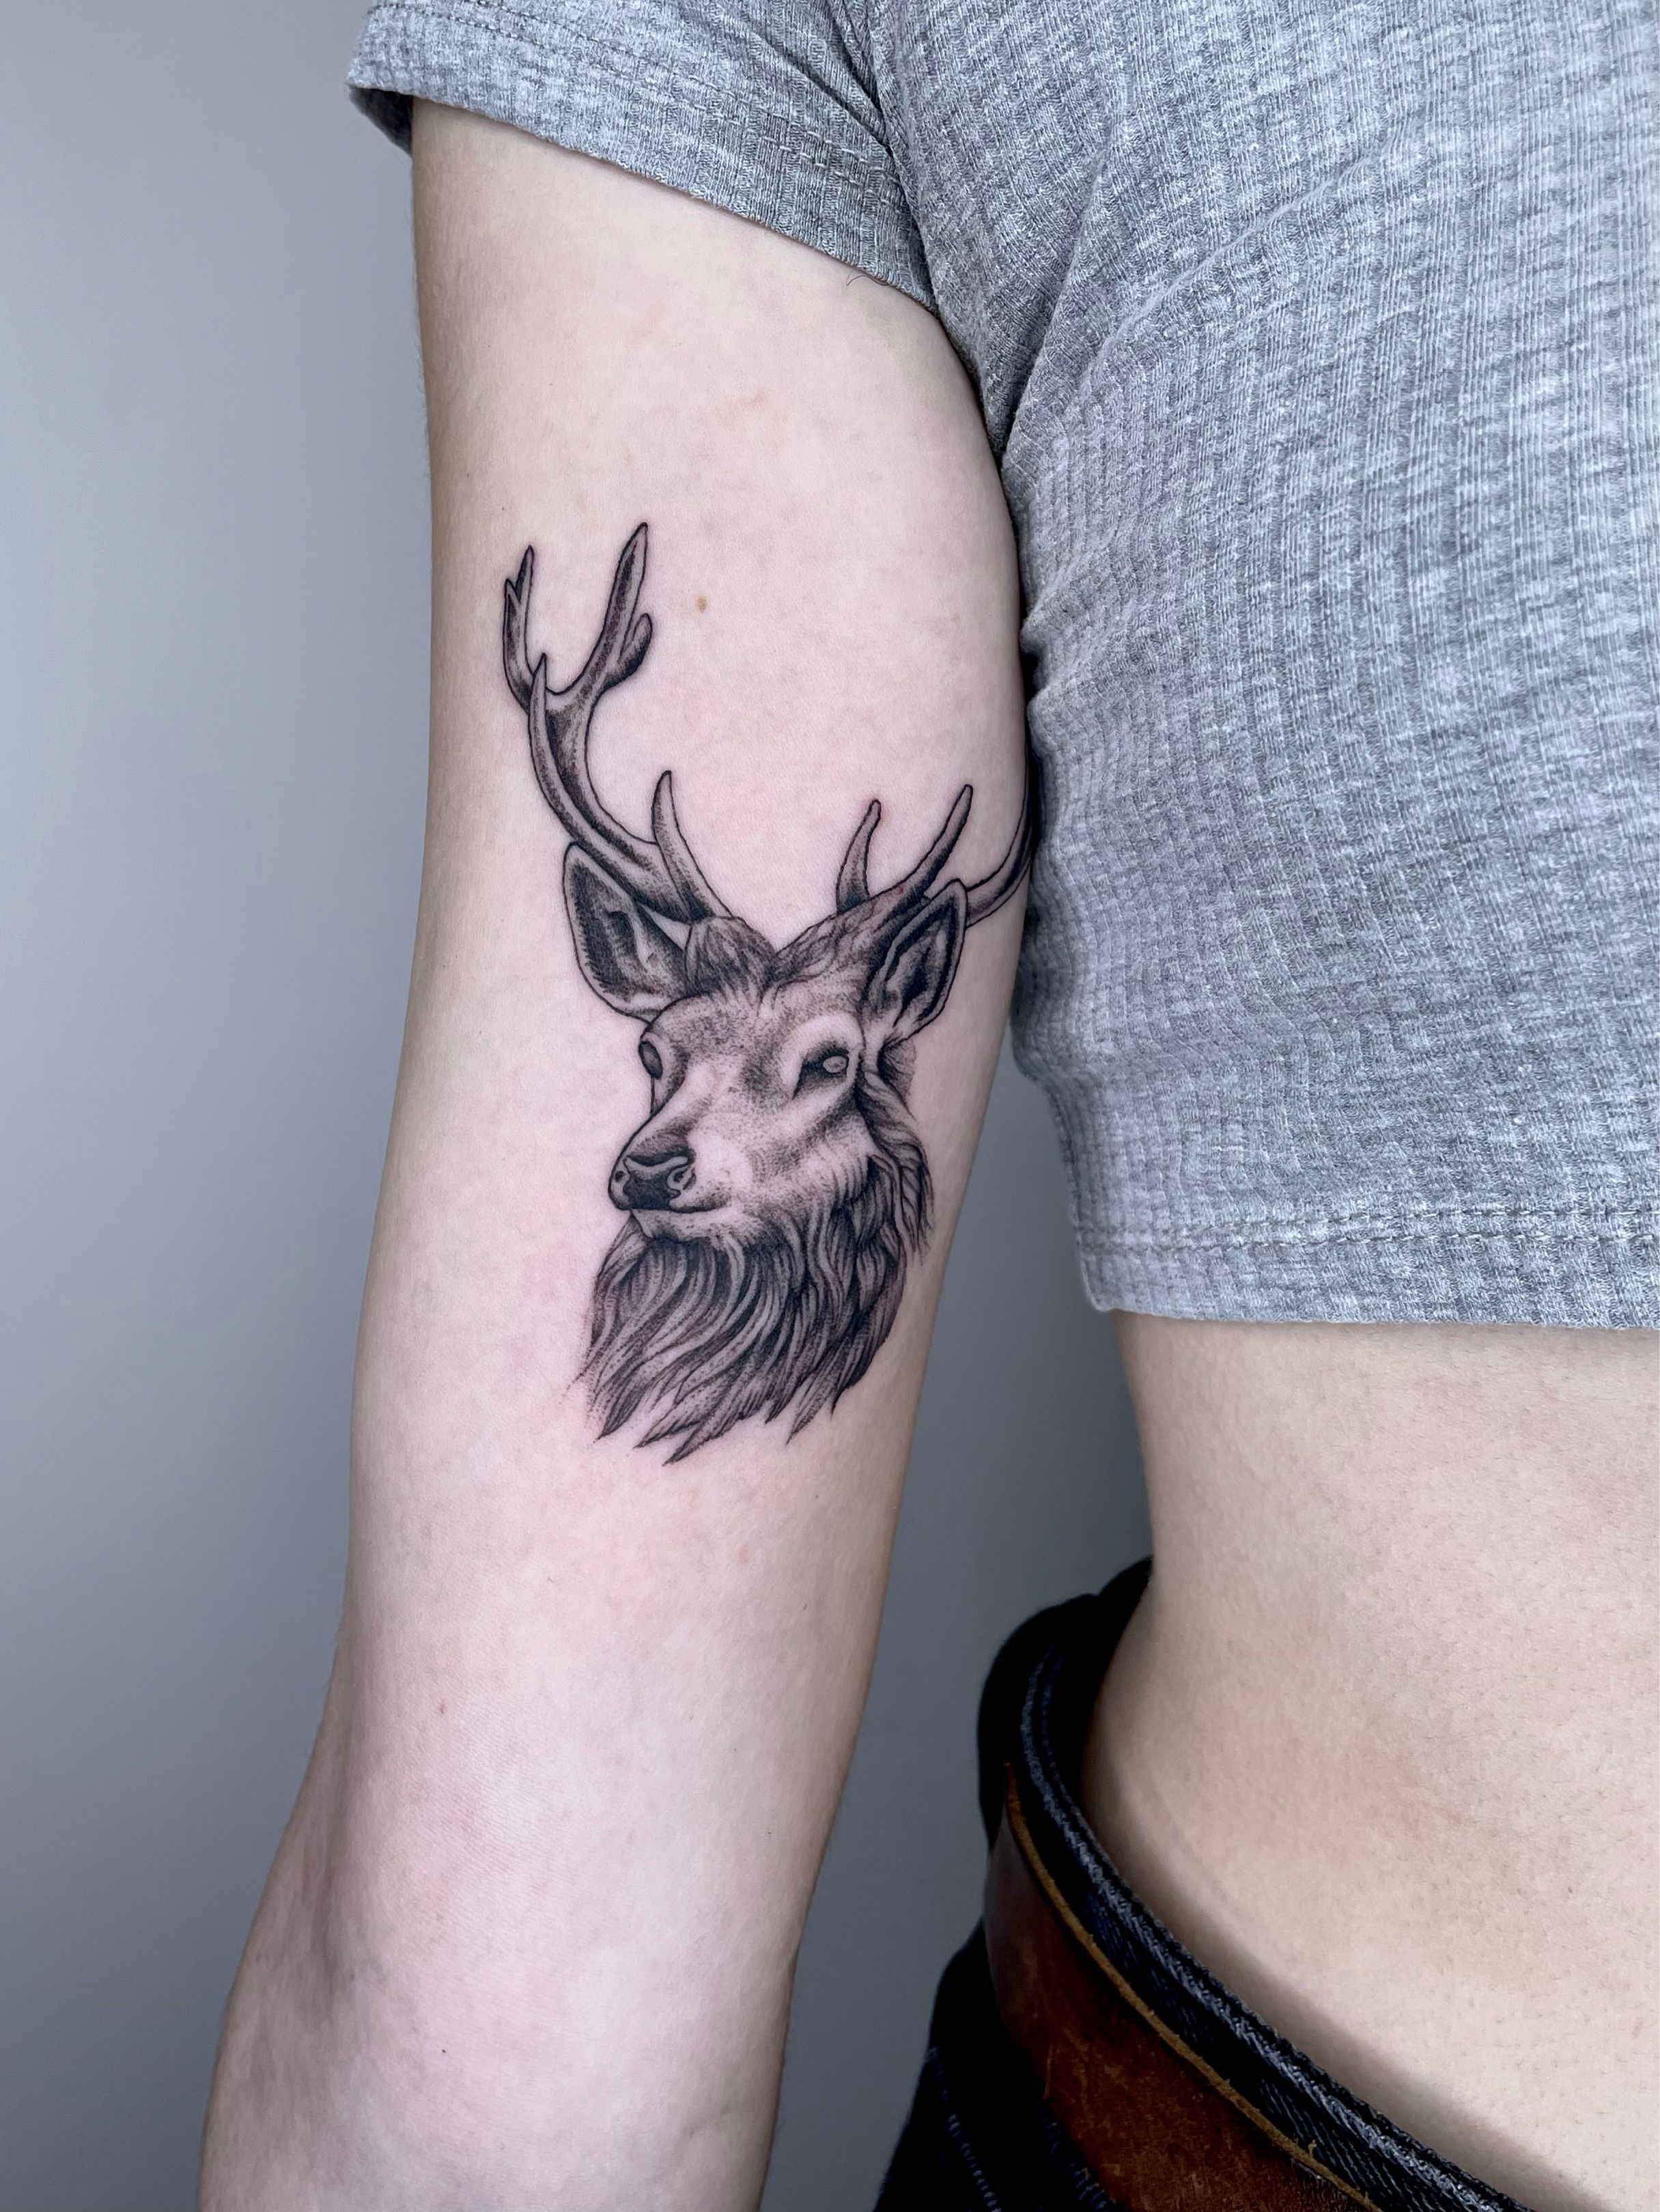 Deer Tattoo Stock Vector Illustration and Royalty Free Deer Tattoo Clipart